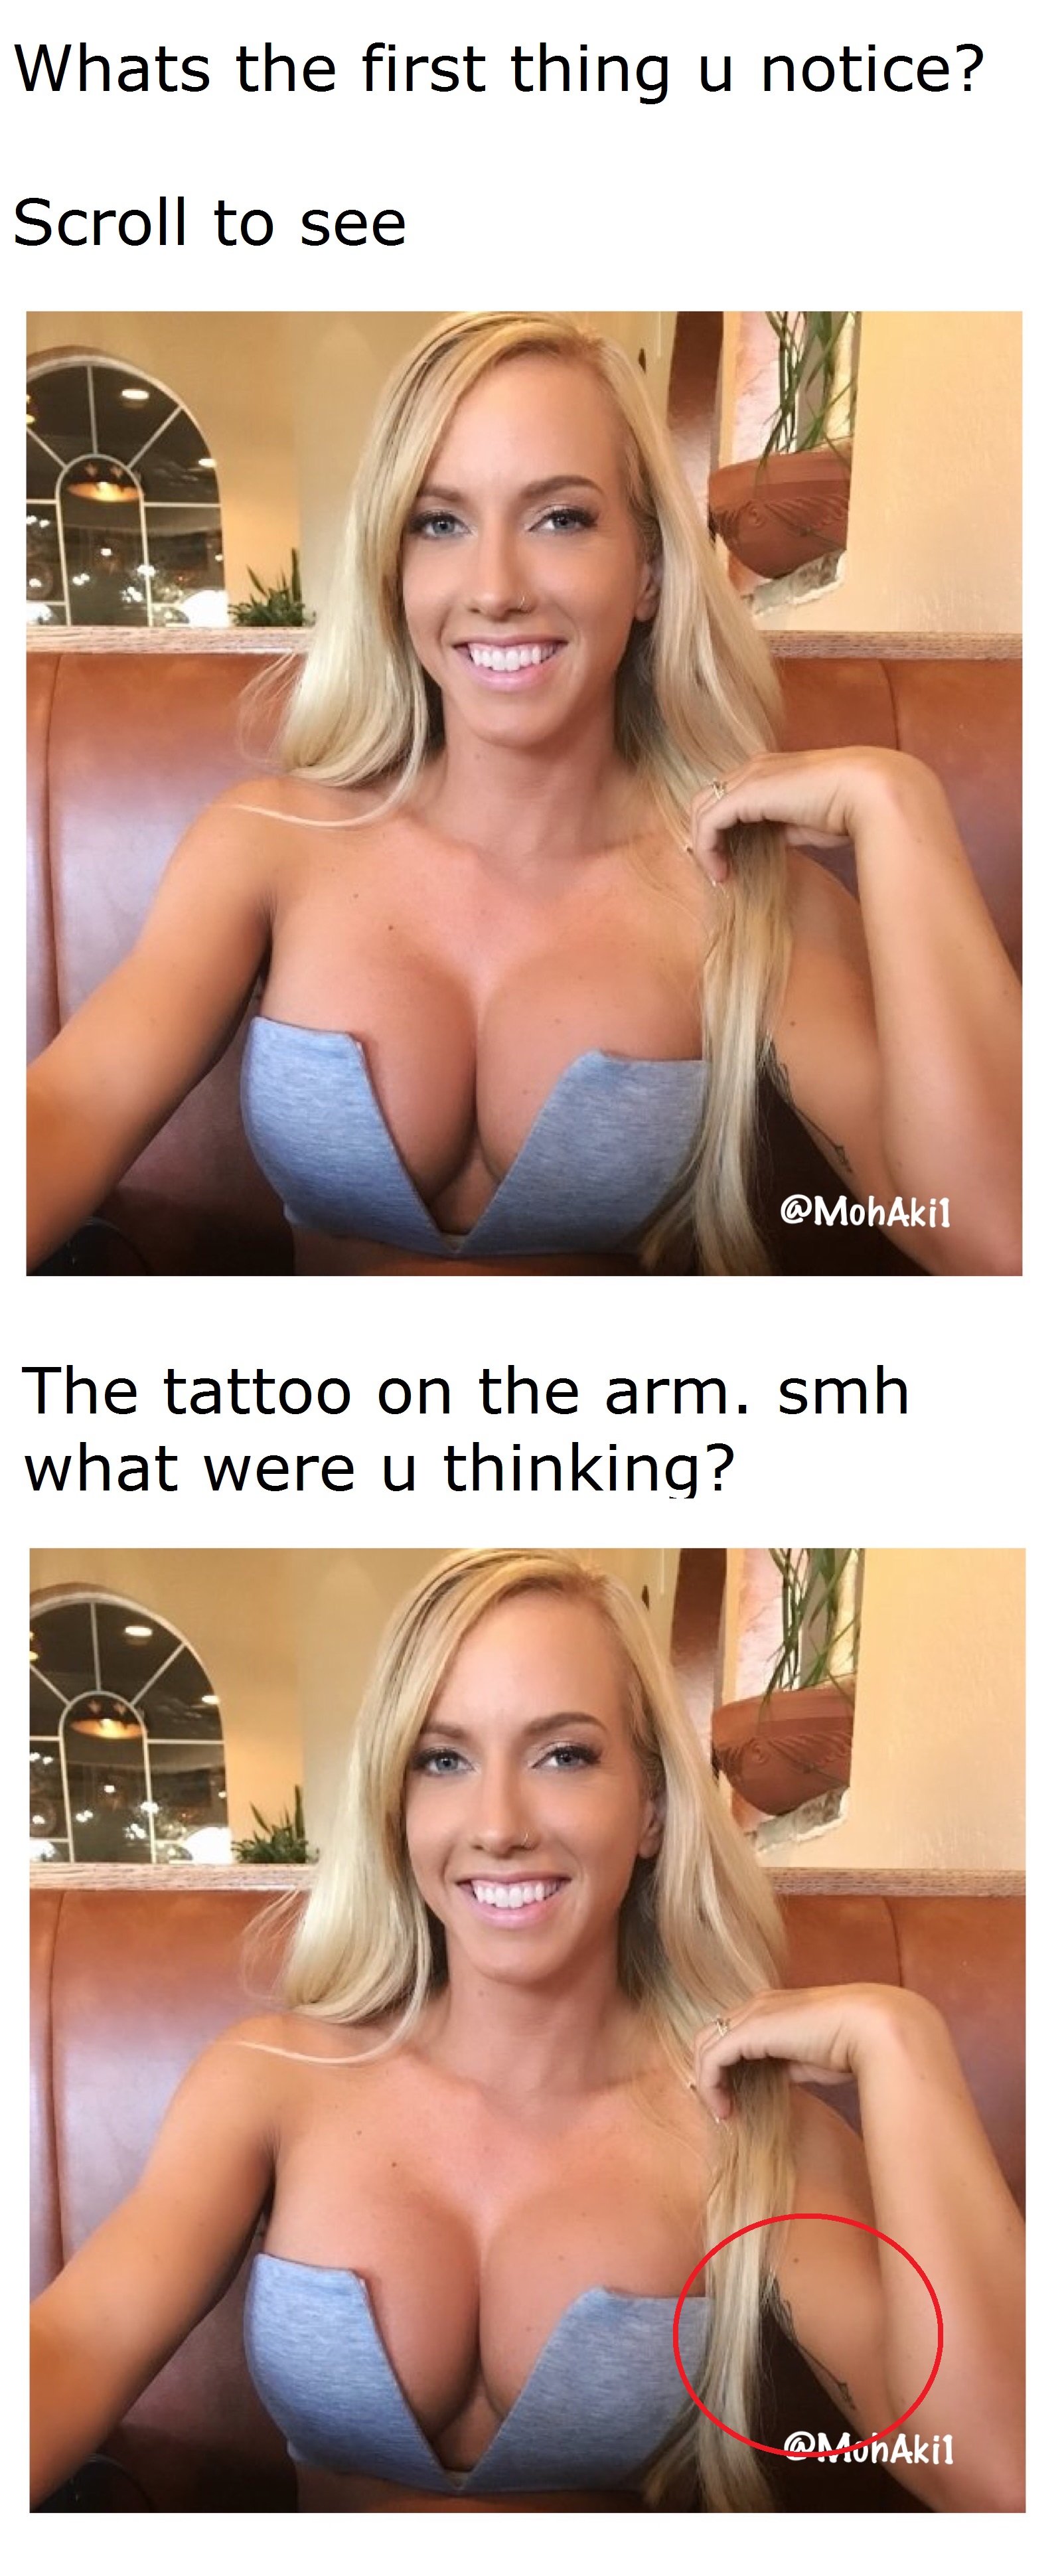 Dank meme of girl with amazing boobs who also has a tattoo that you probably did not notice at all